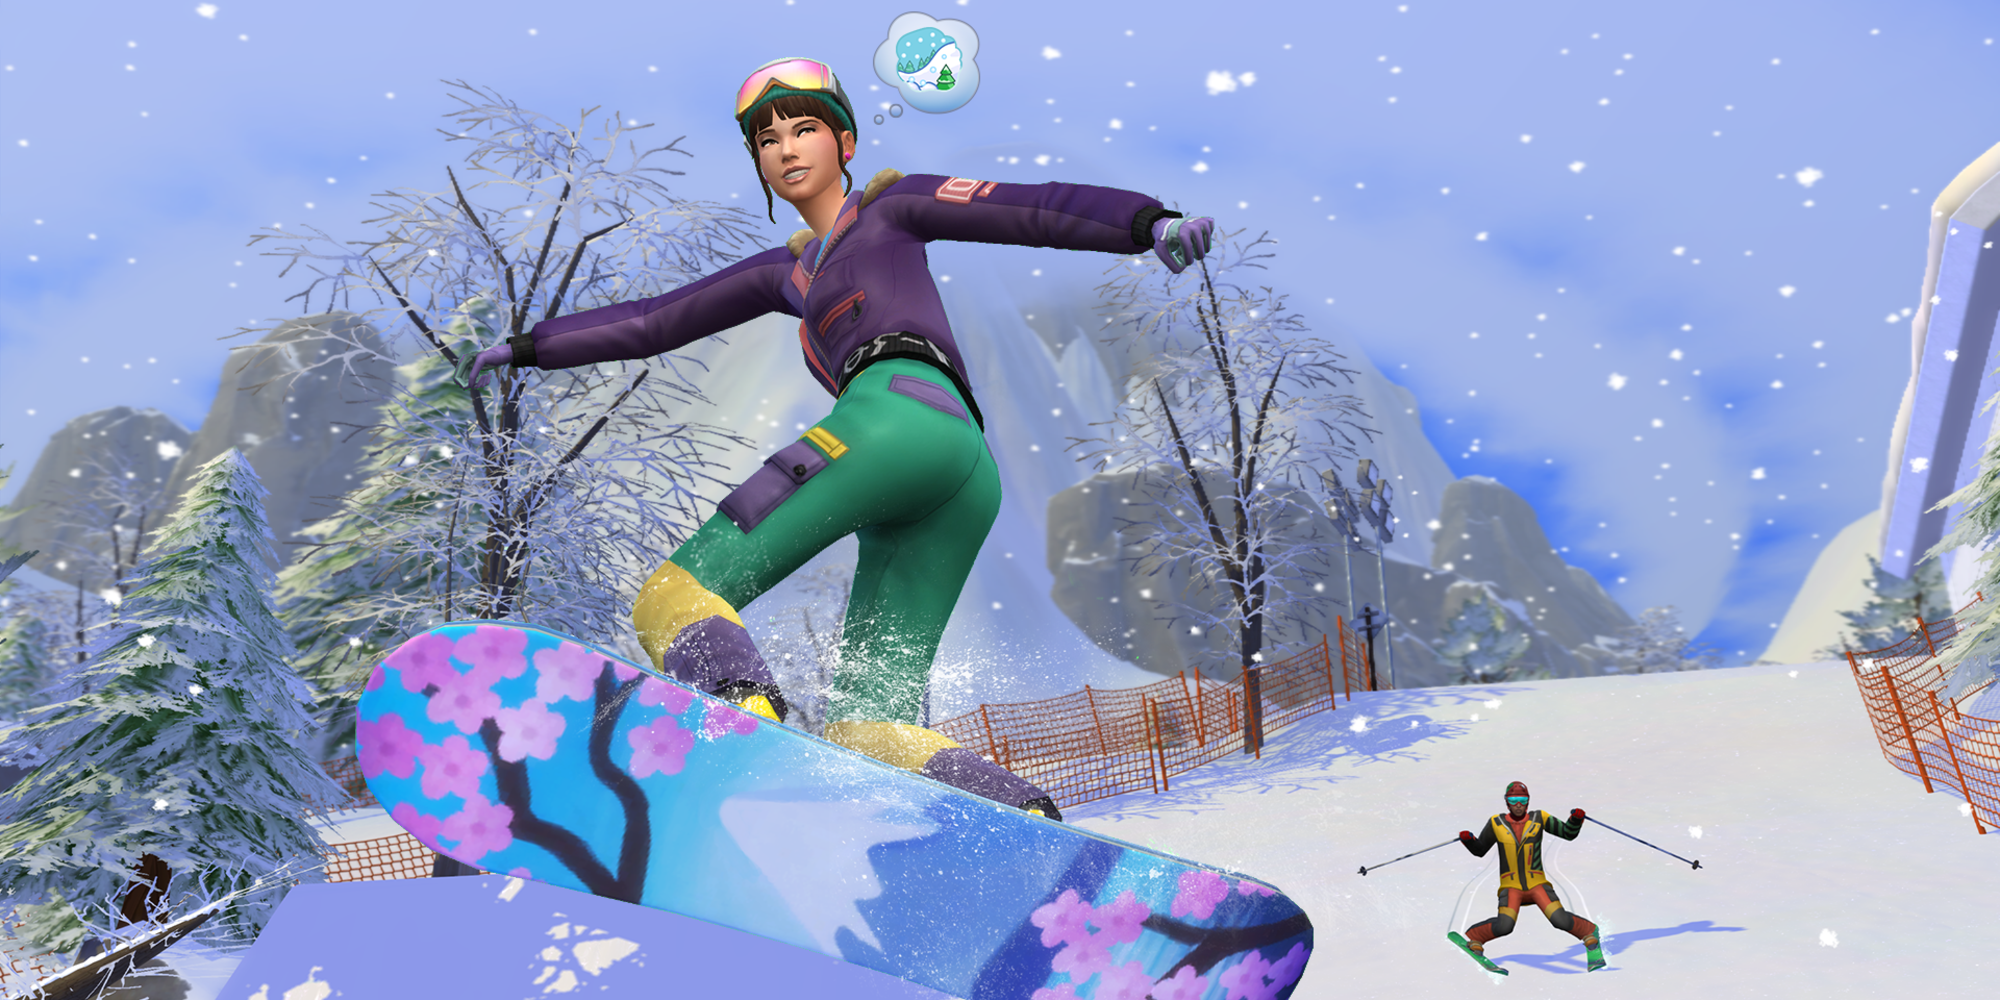 A Sim snowboards on Mount Komorebi in The Sims 4: Snowy Escape